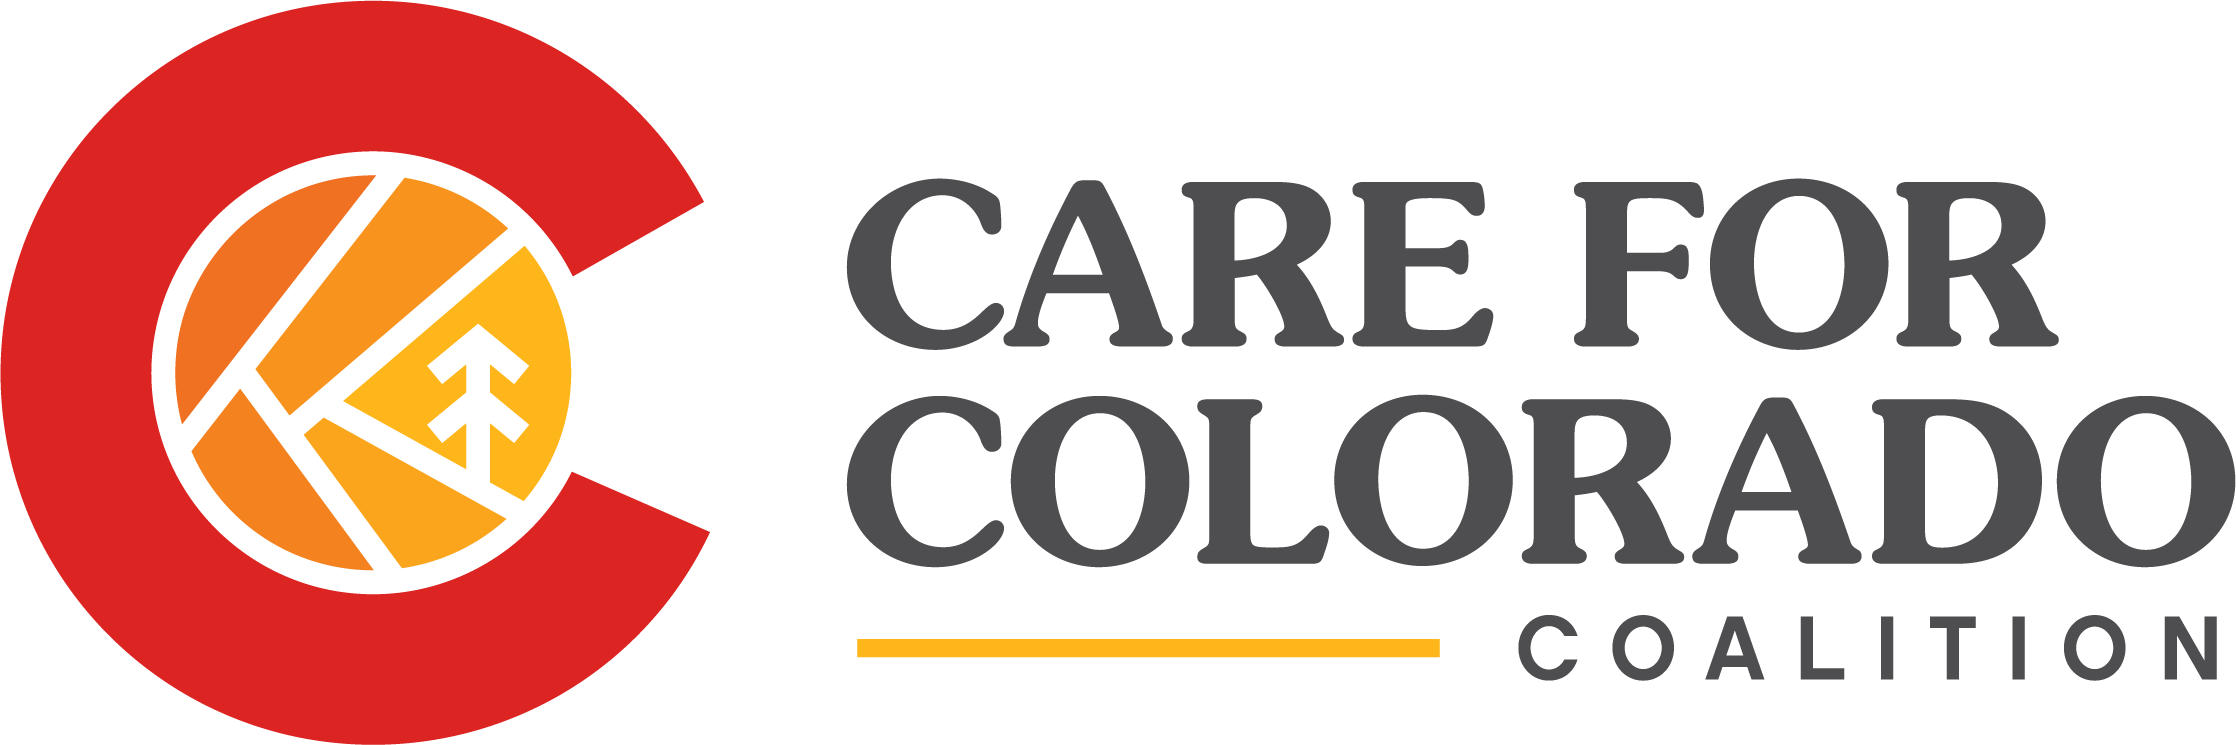 A logo that reads "Care for Colorado Coalition."